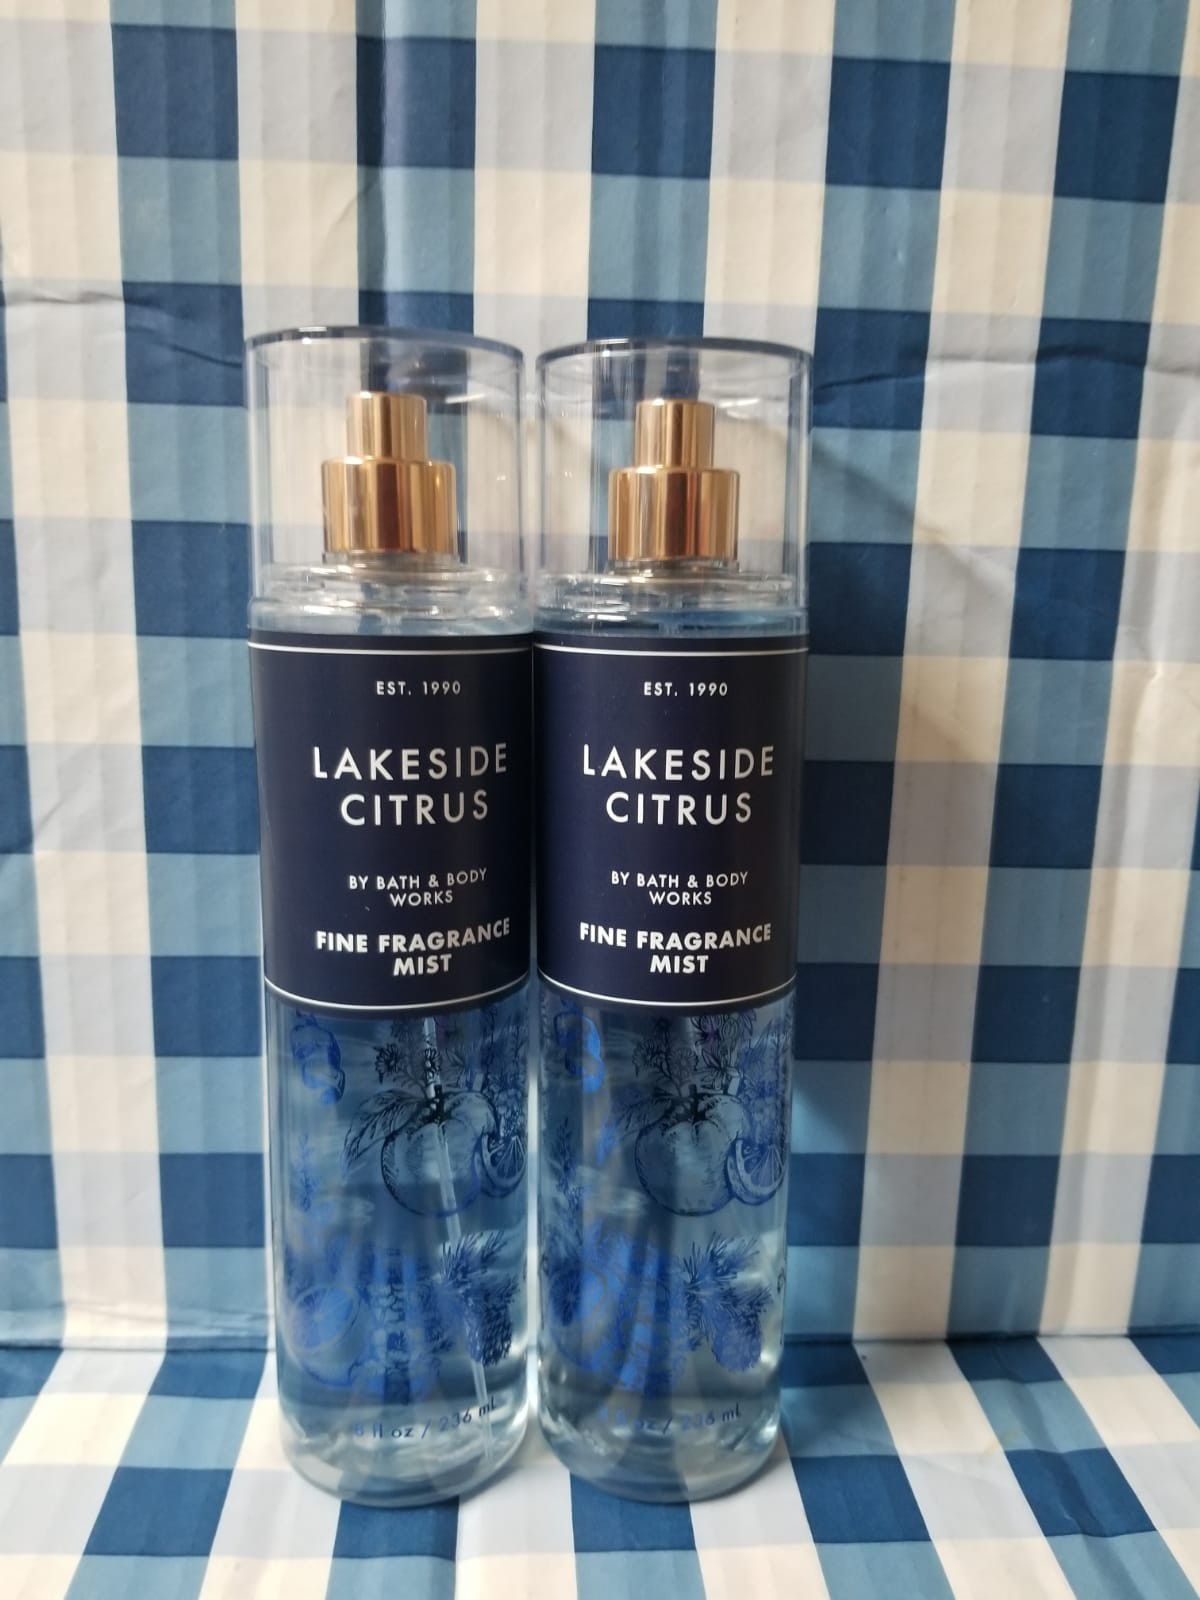 Bath and Body Works Lakeside Citrus Fragrance Mists $10 each one